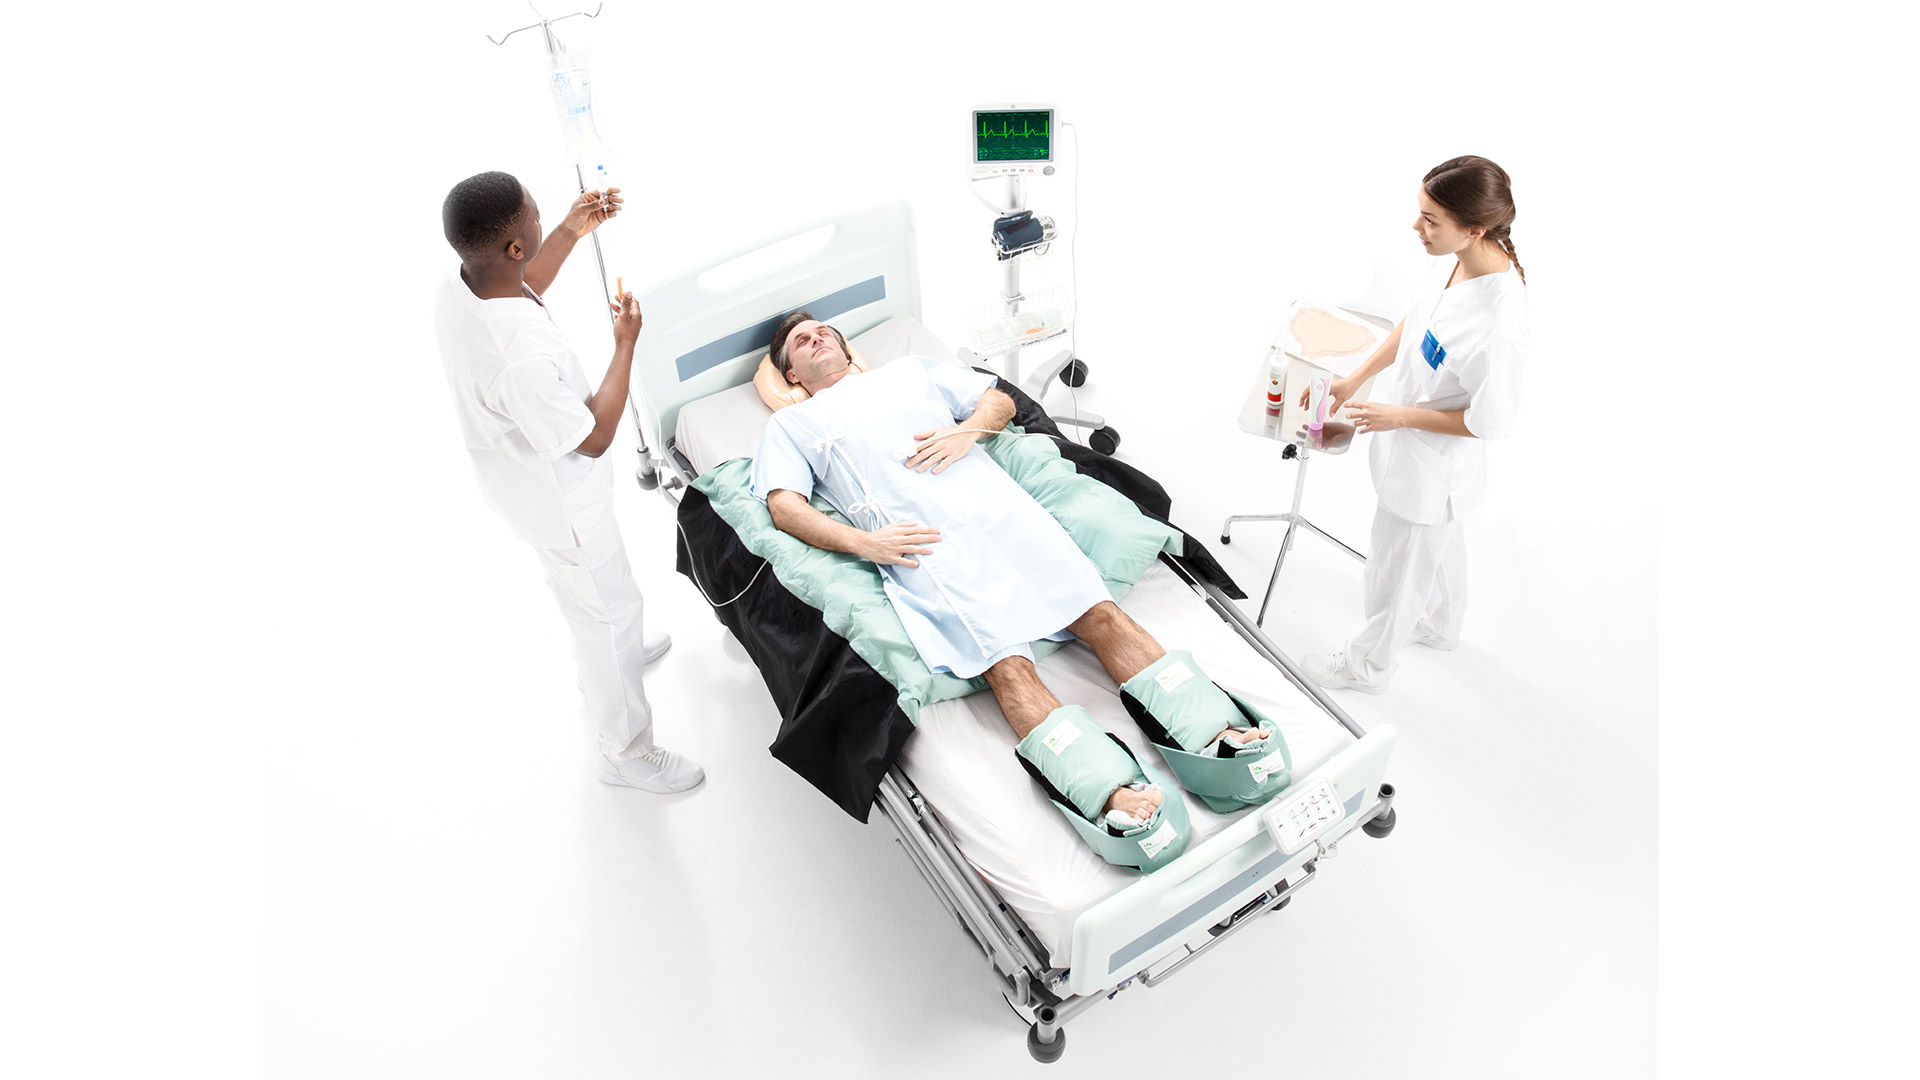 two clinicians and a patient on a turning and positioning system